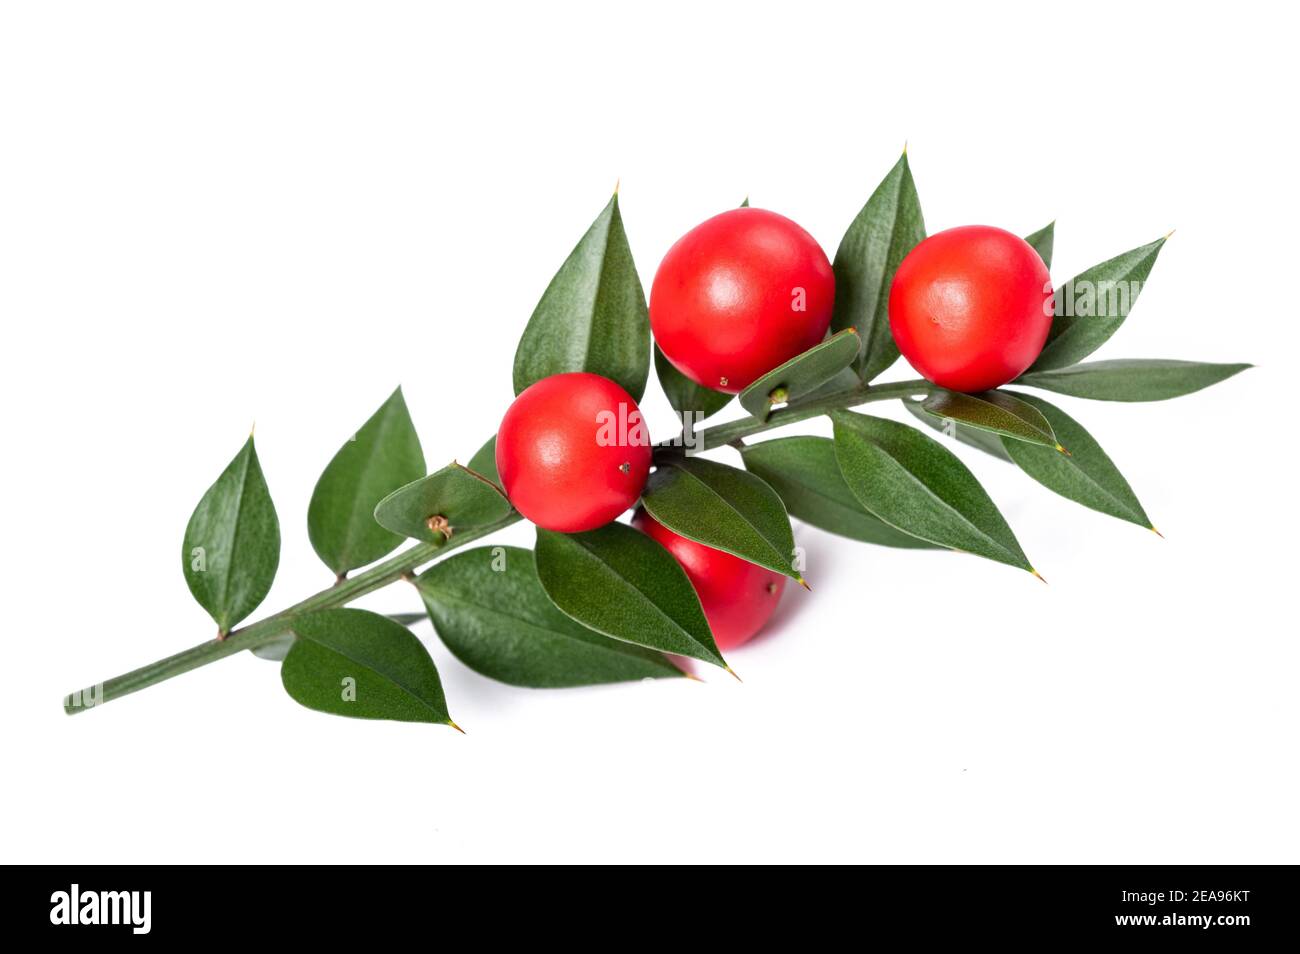 Butcher's broom with berries isolated on white background Stock Photo